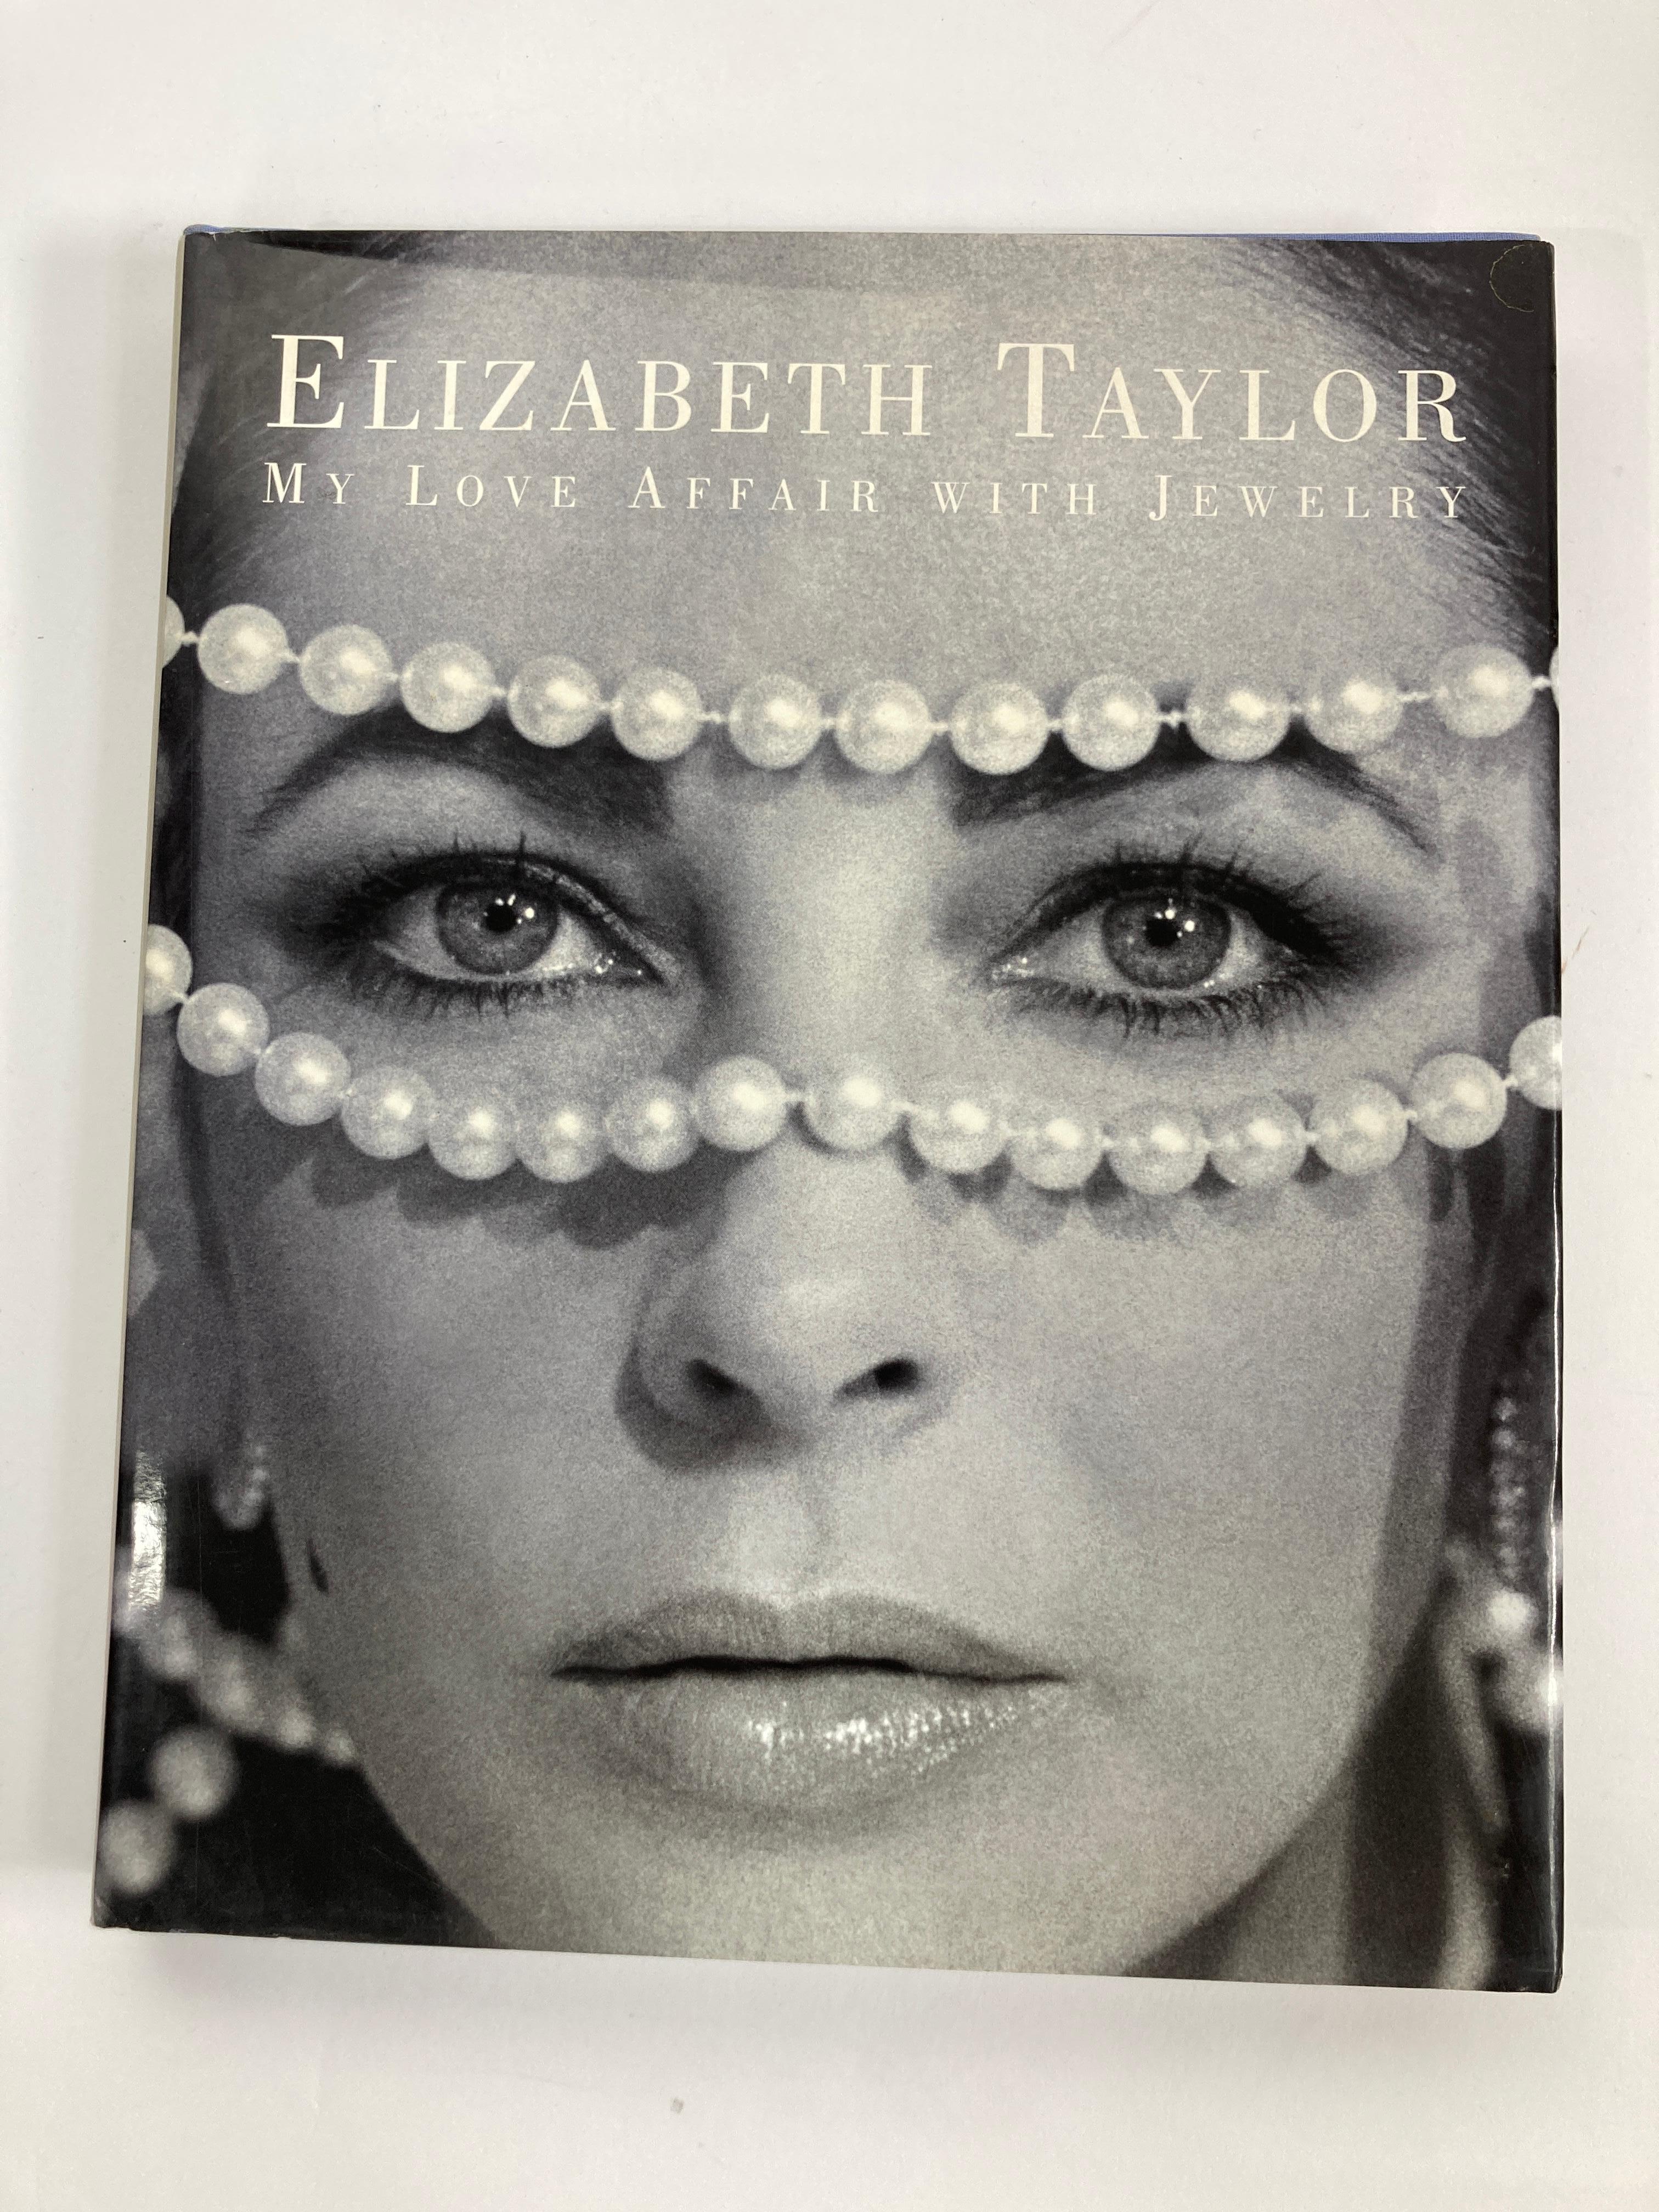  Elizabeth Taylor: My Love Affair With Jewelry 1st Edition Hardcover Book
Edited by Ruth A. Peltason. 280 illustrations, including 175 color photographs by John Bigelow Taylor.
